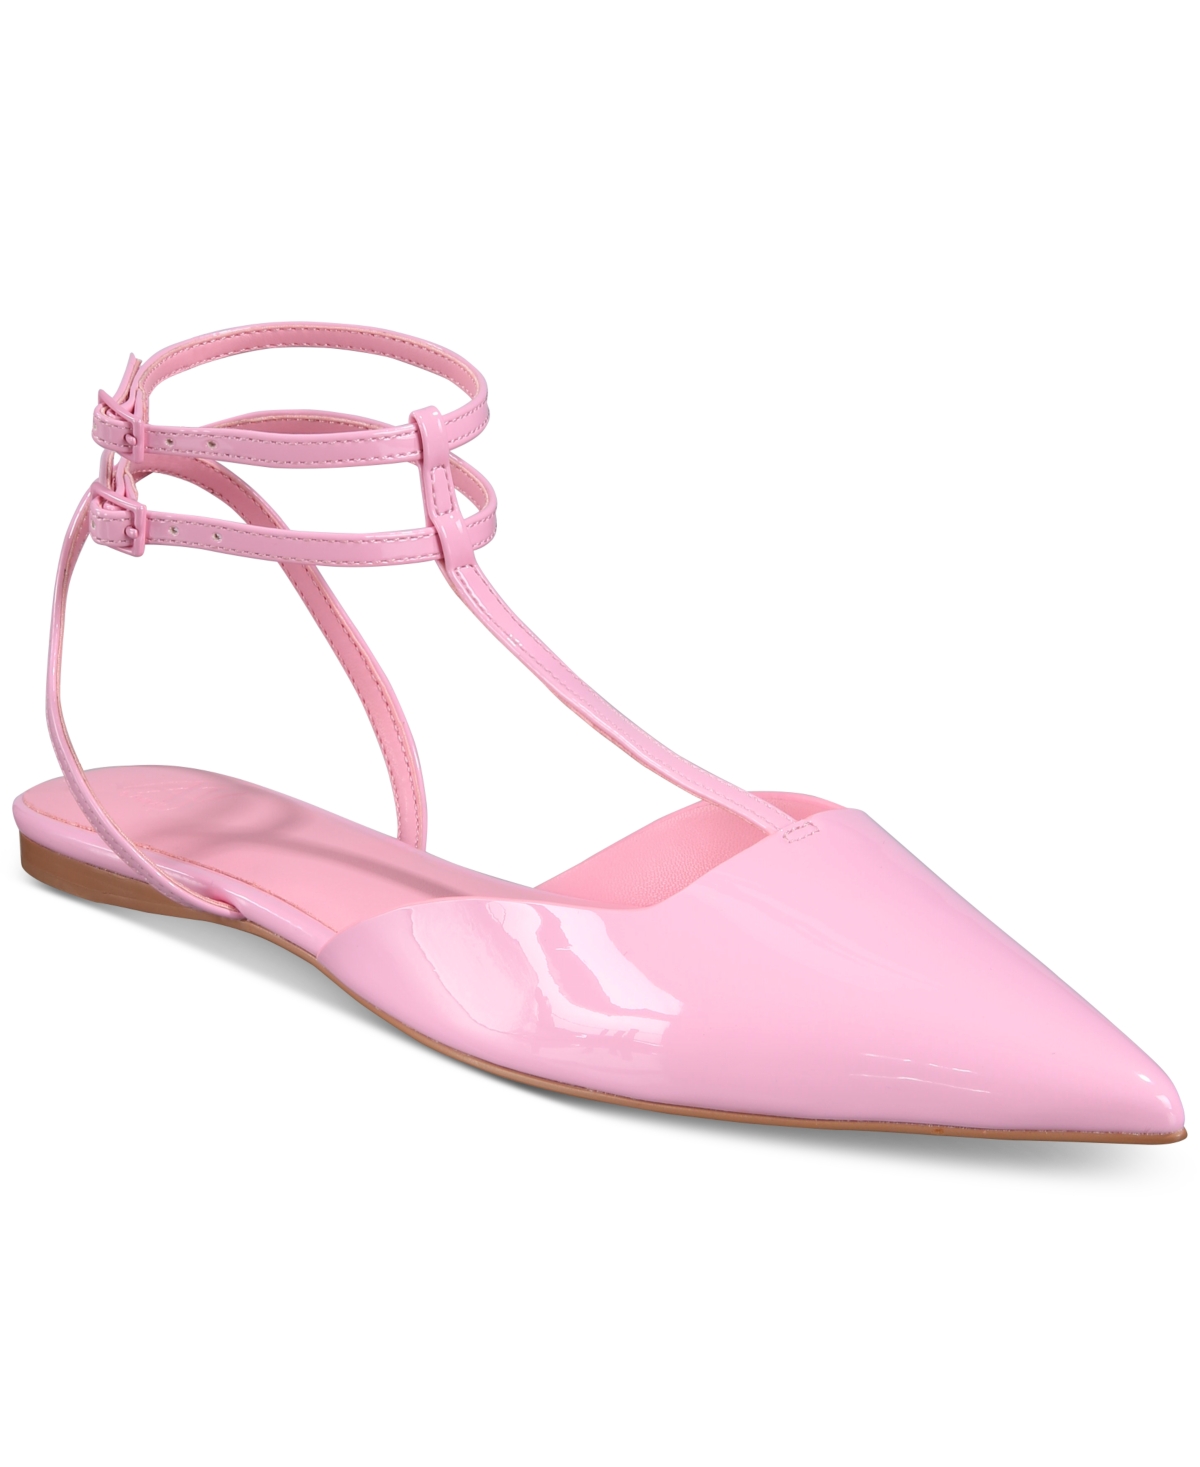 Kaia Pointed-Toe Strappy Flats - Pink Satin